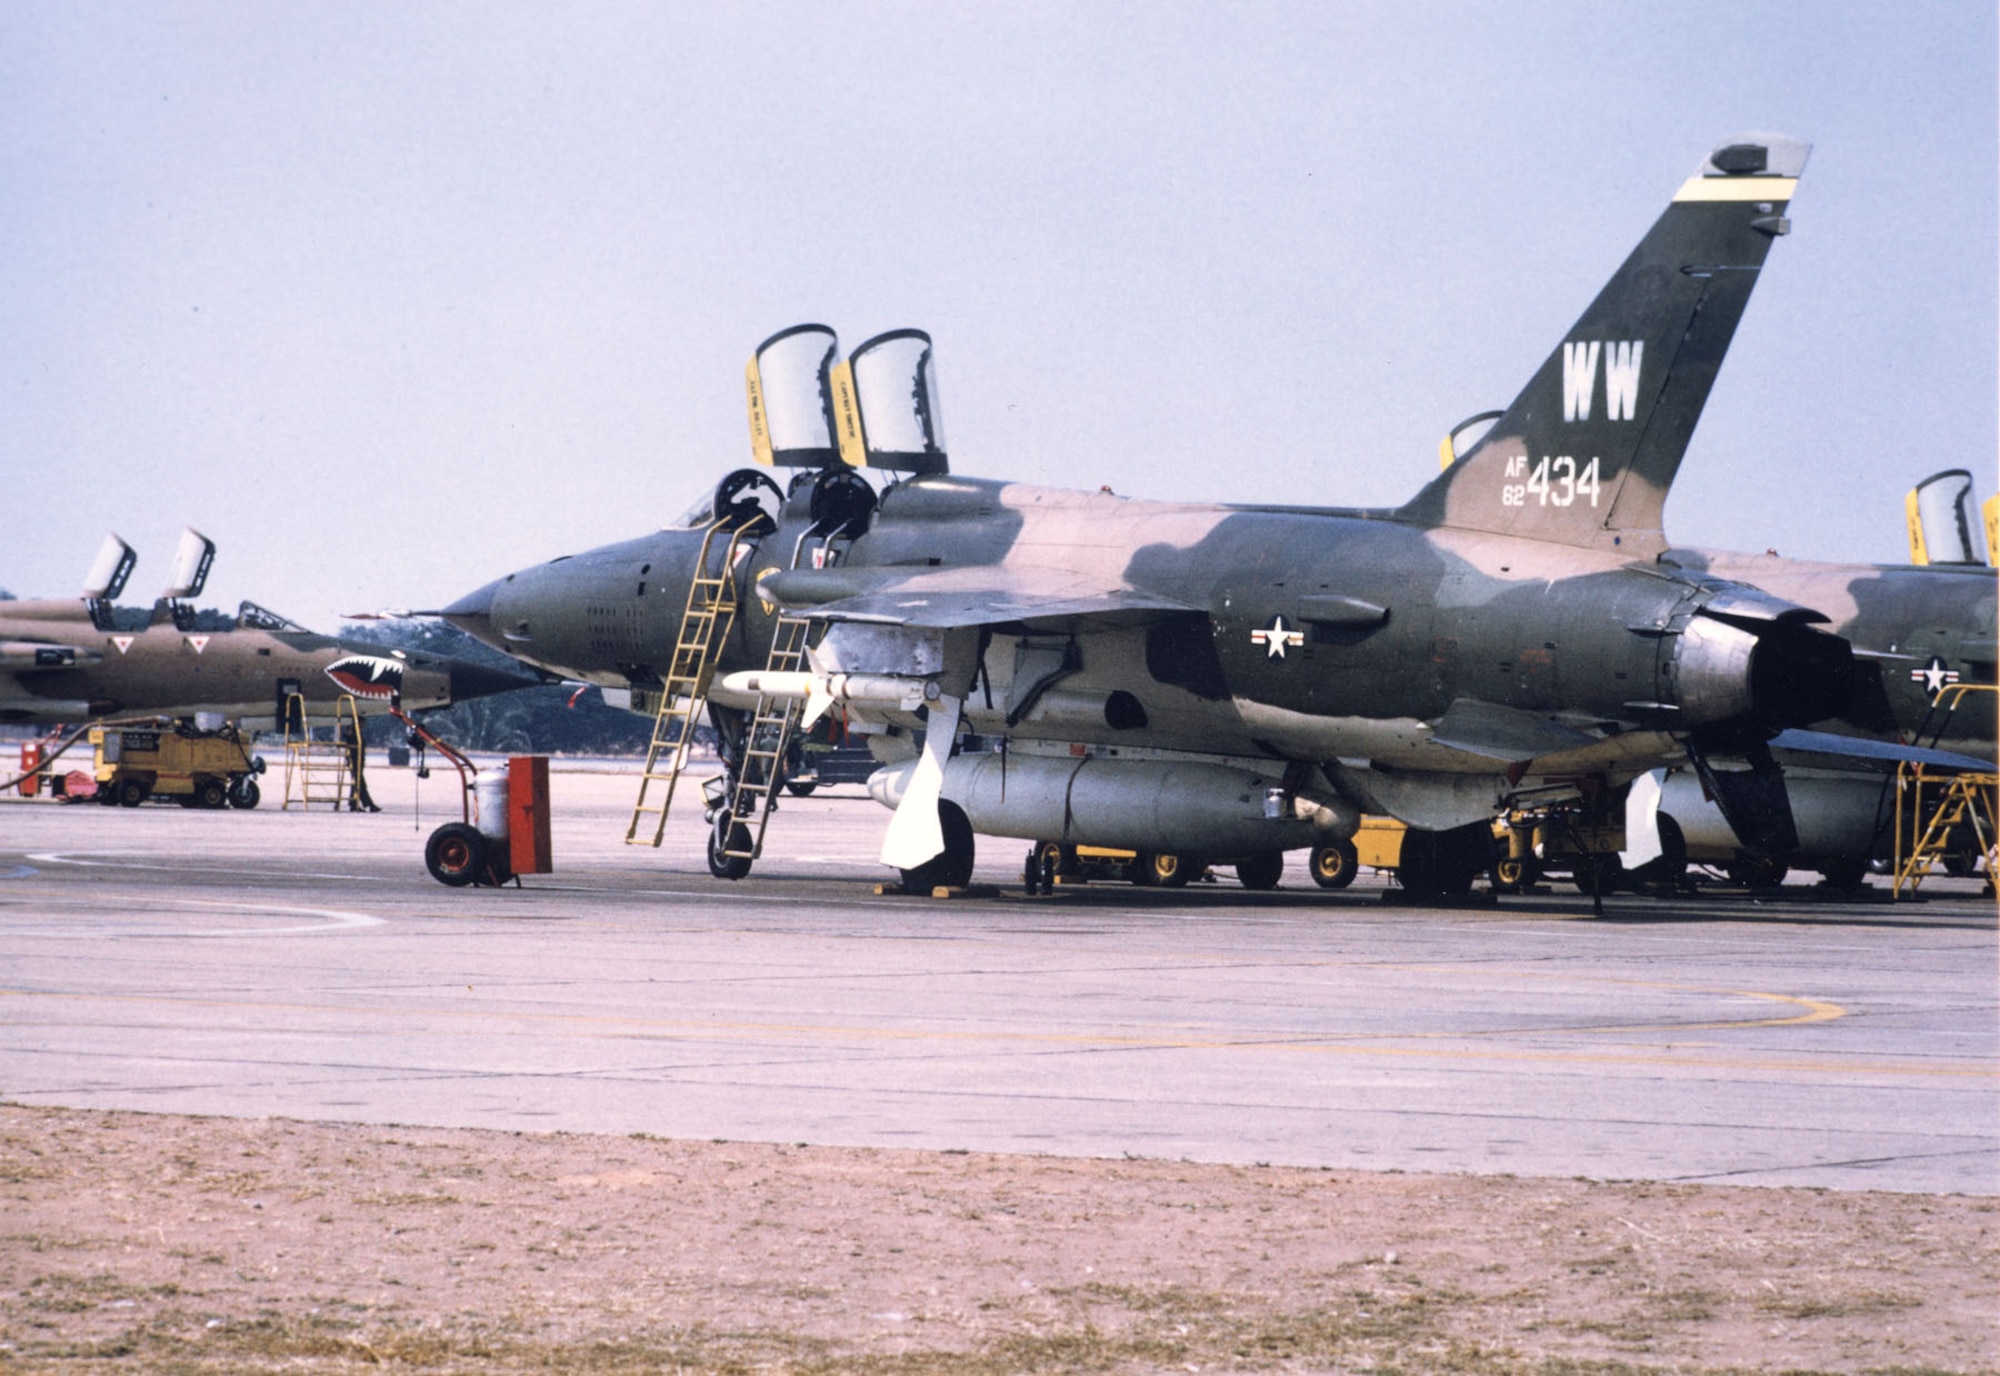 F-105G of the 561st Tactical Fighter Squadron at Korat. (U.S. Air Force photo)